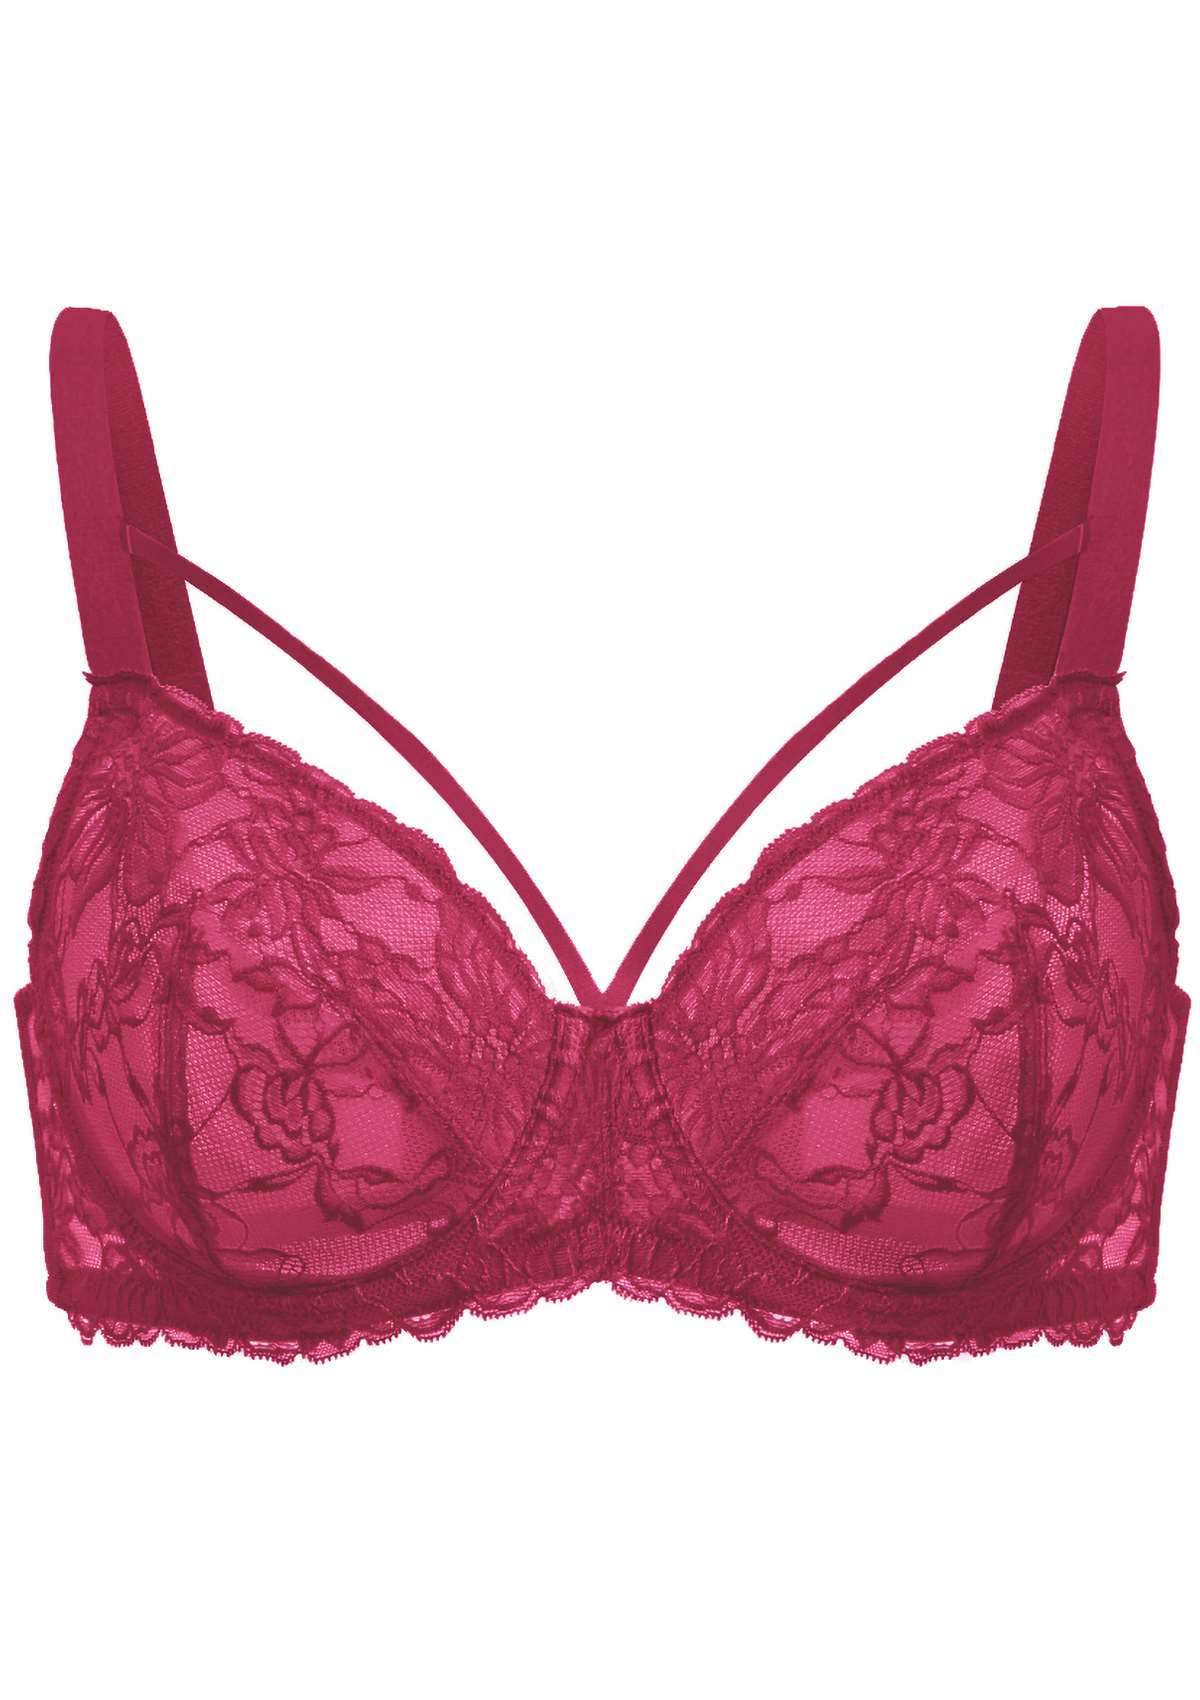 HSIA Pretty In Petals Sexy Lace Bra: Full Coverage Back Smoothing Bra - Red / 42 / H